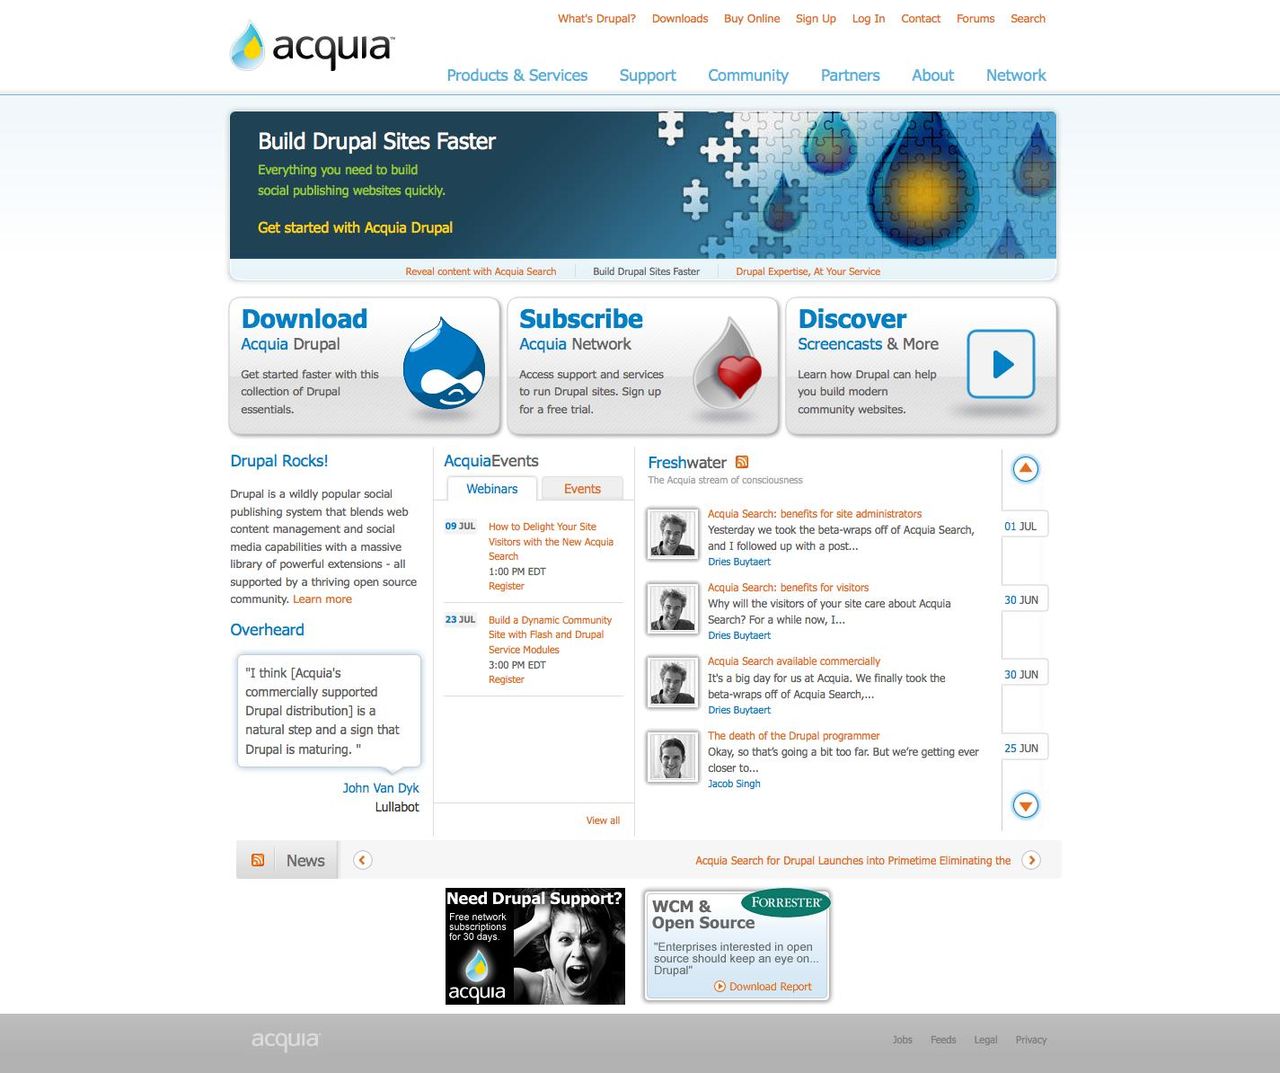 Acquia.com's homepage as captured in July 2009.